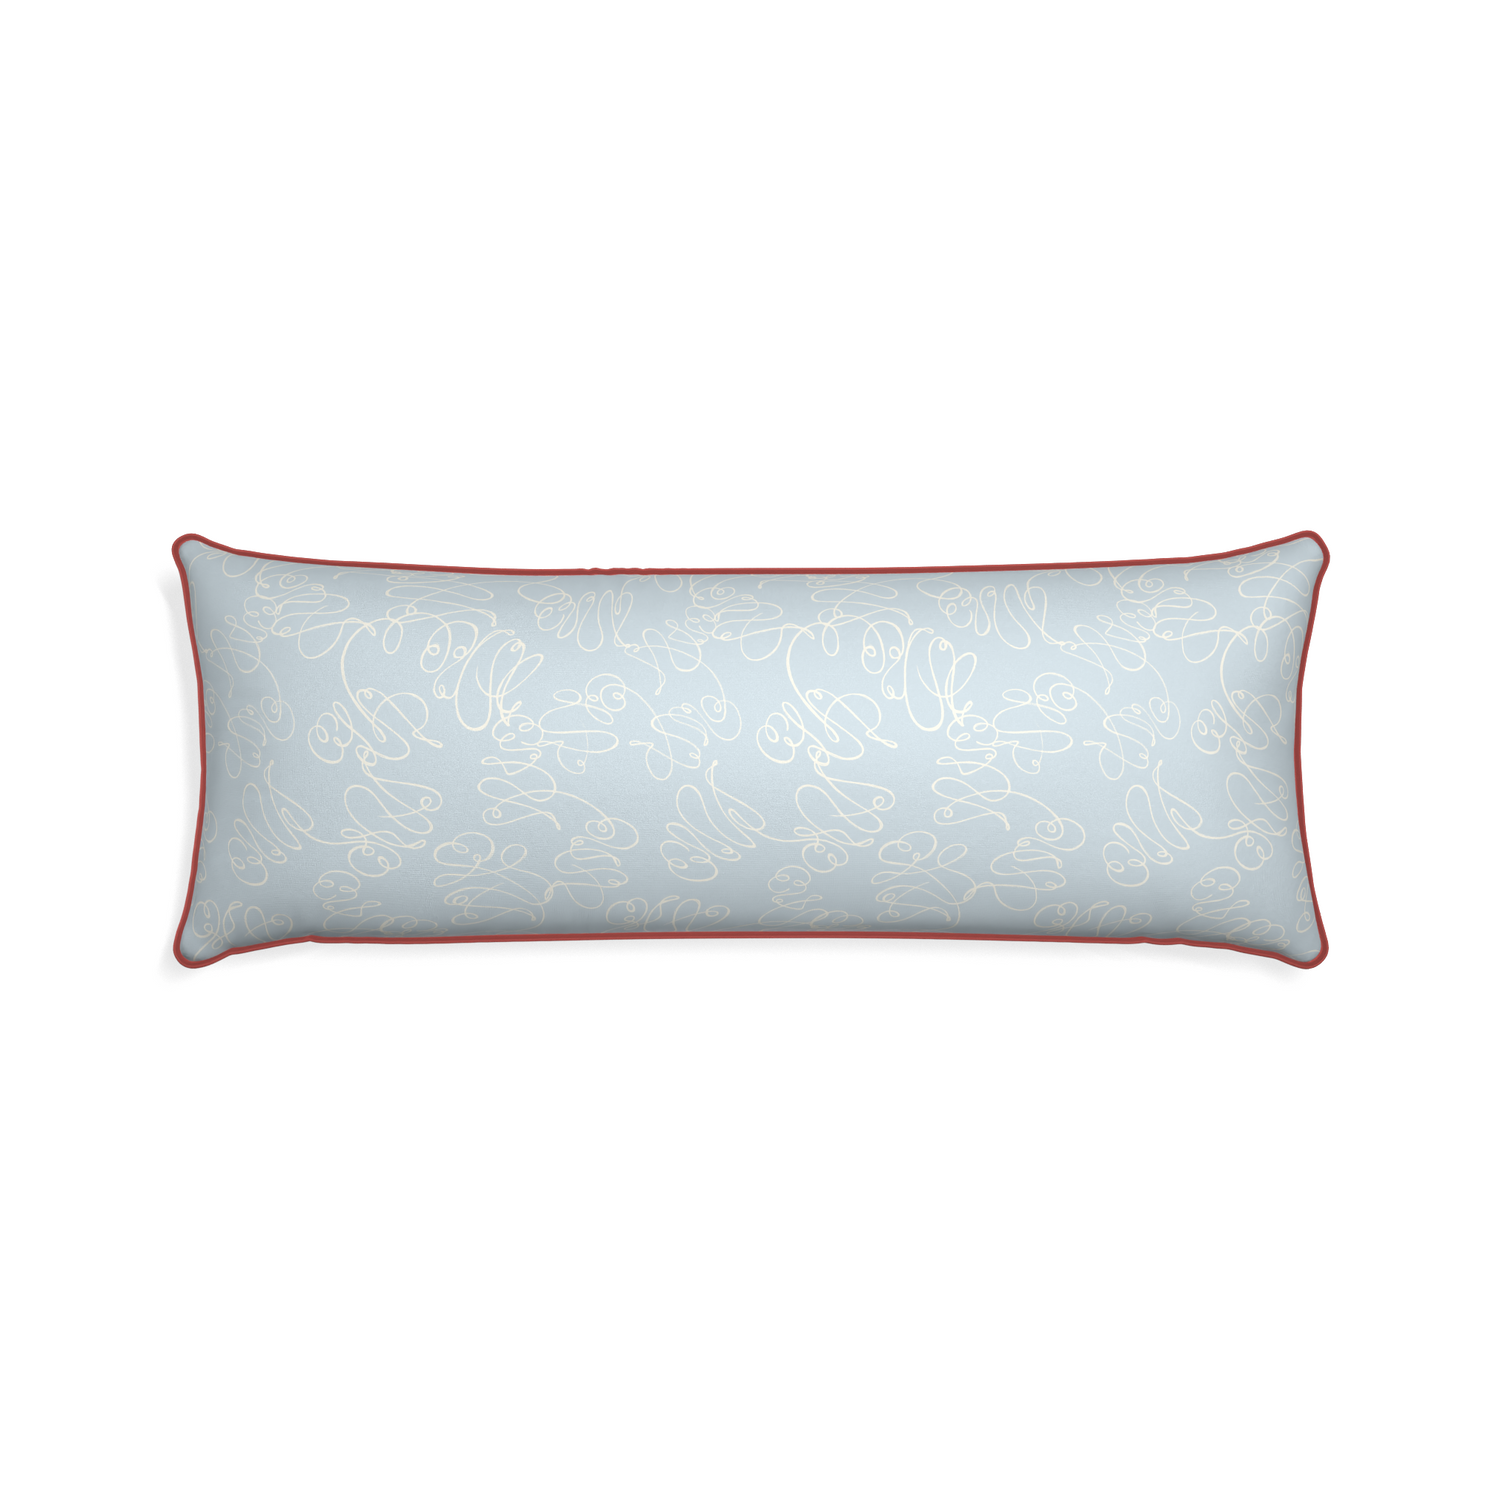 Xl-lumbar mirabella custom powder blue abstractpillow with c piping on white background